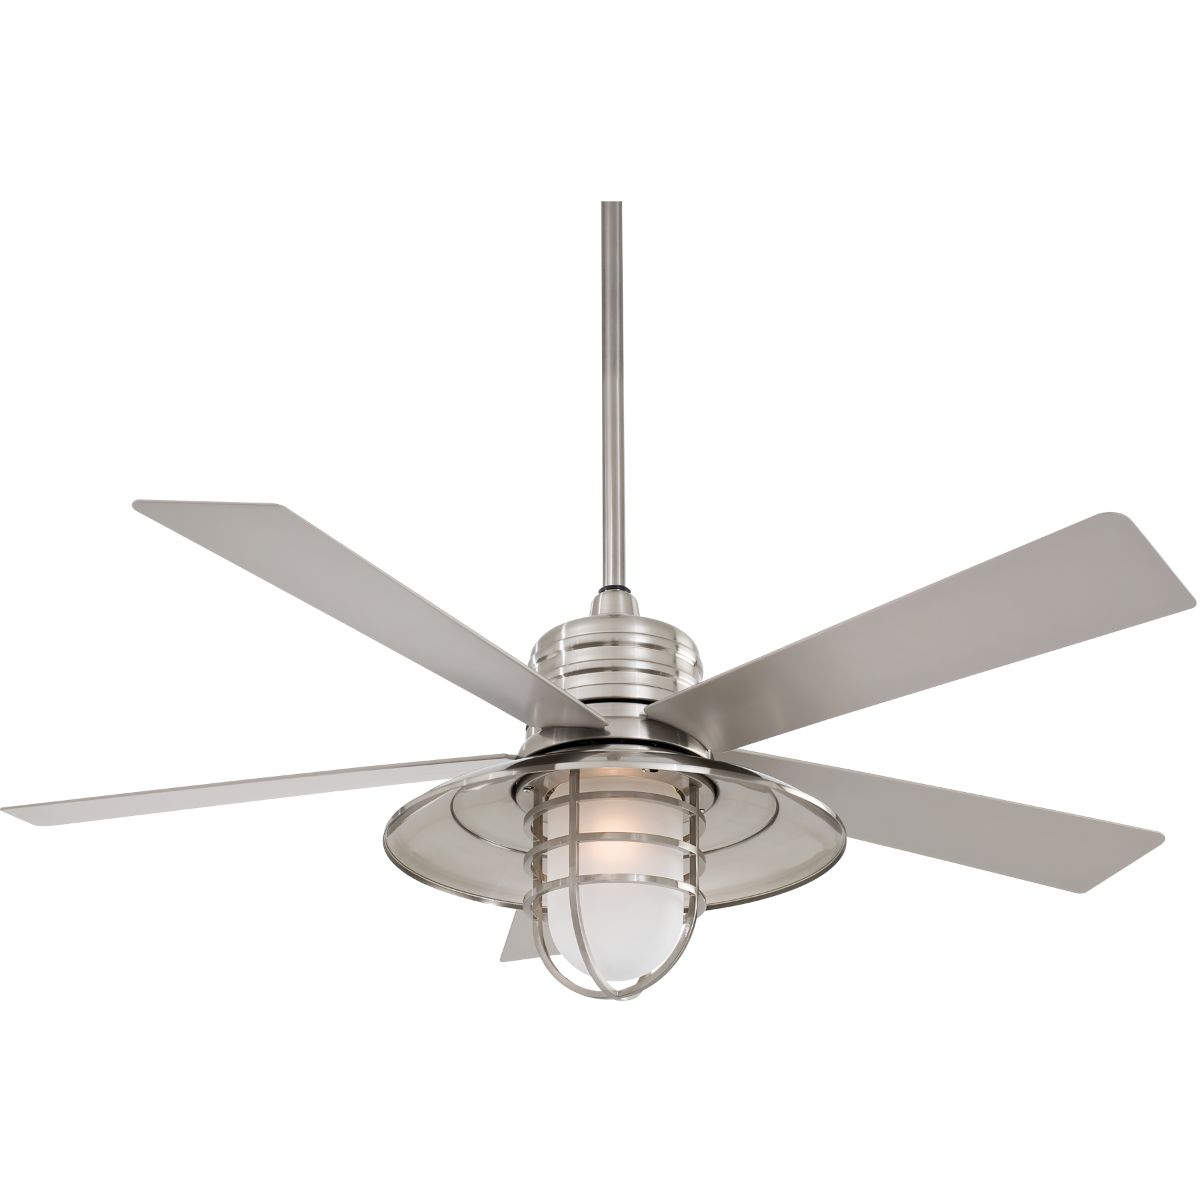 Rainman 54 Inch Contemporary Outdoor Ceiling Fan With Light, Wall Control Included